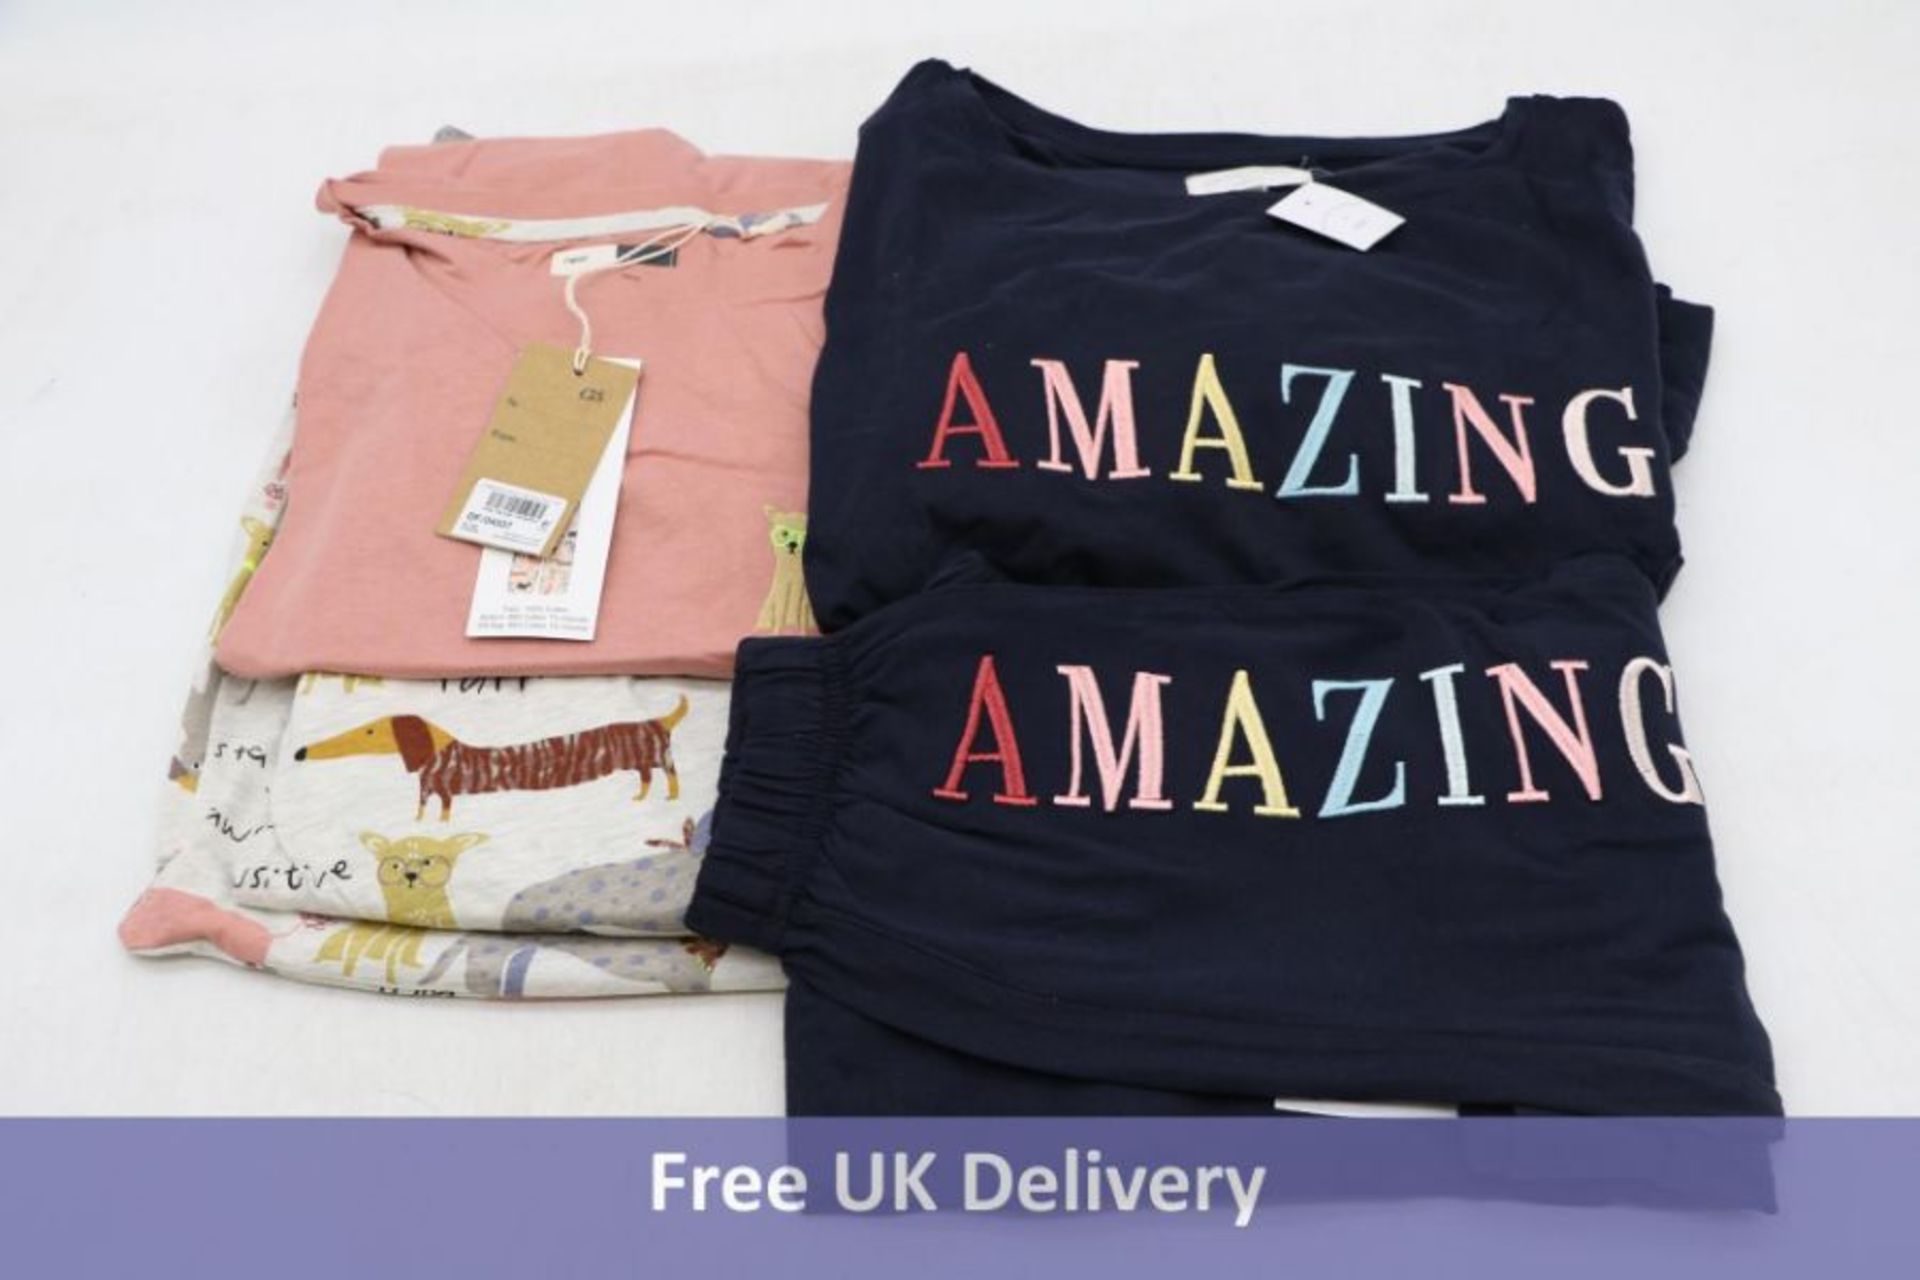 Two Pairs Of Next Pyjamas to include 1x Amazing PJ Set, Navy, Small Tall, 1x Pj's In A Bag, Pink And